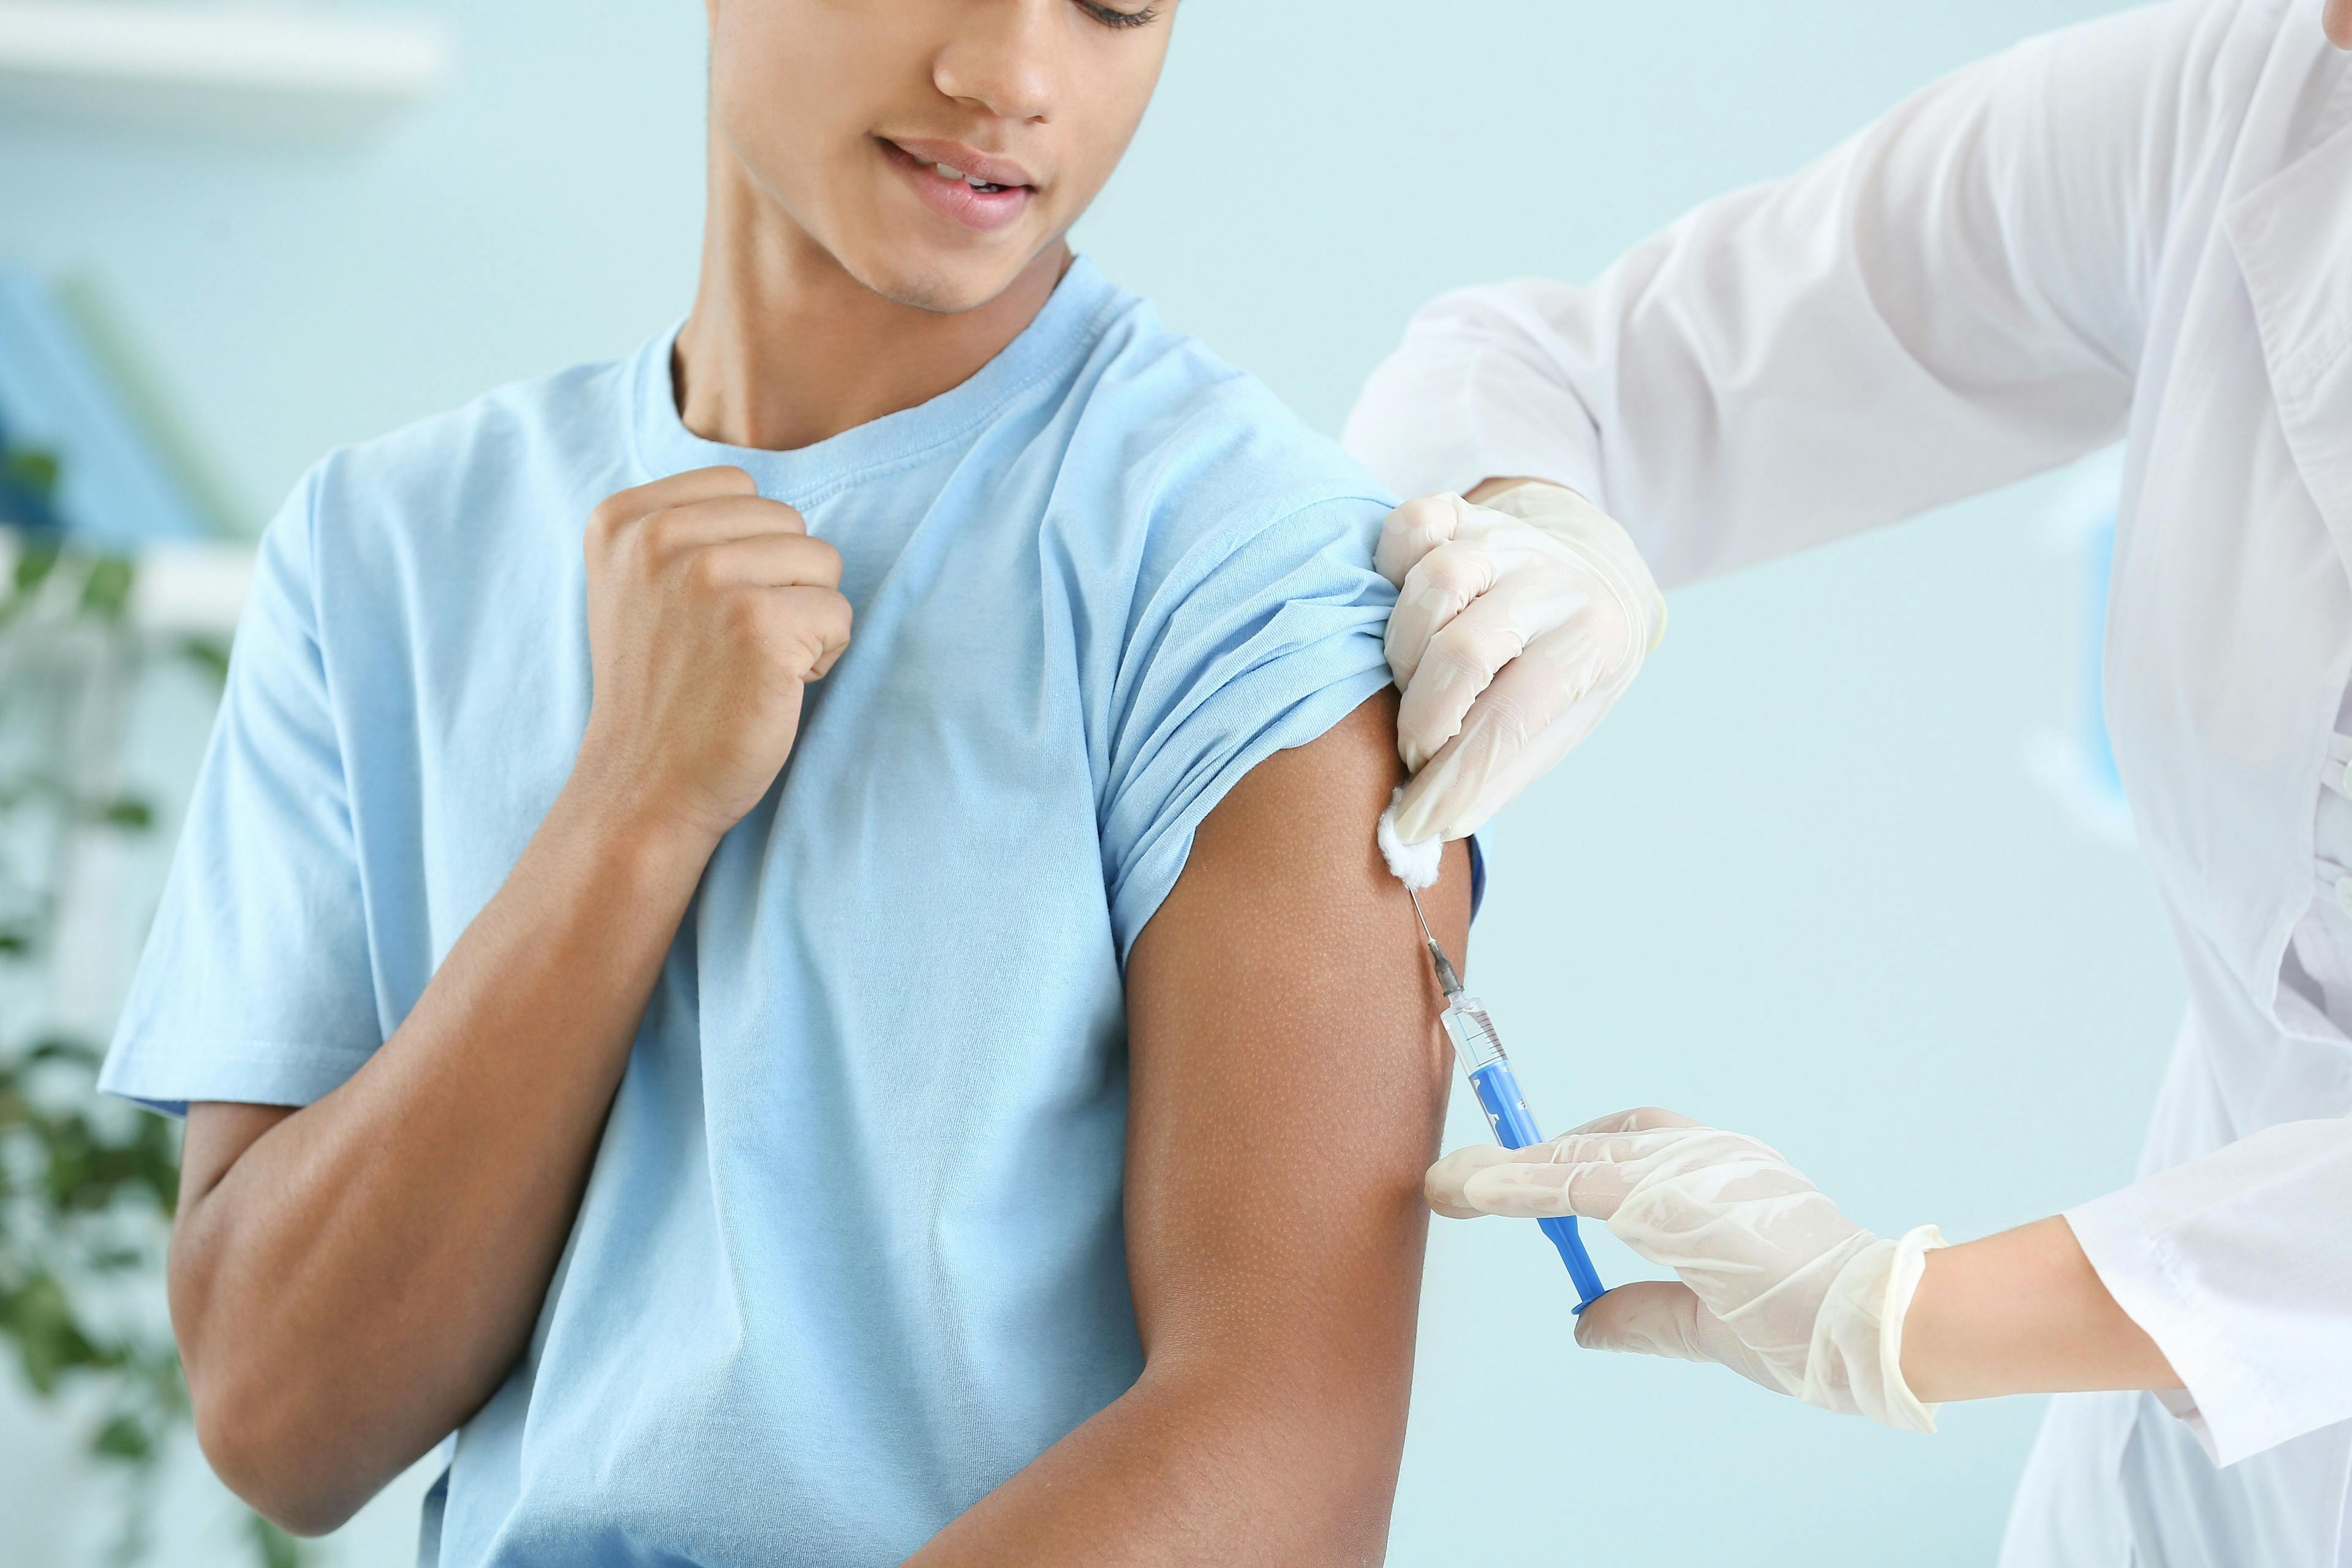 Doctor vaccinating teenage boy in clinic | Image credit: Pixel-Shot - stock.adobe.com